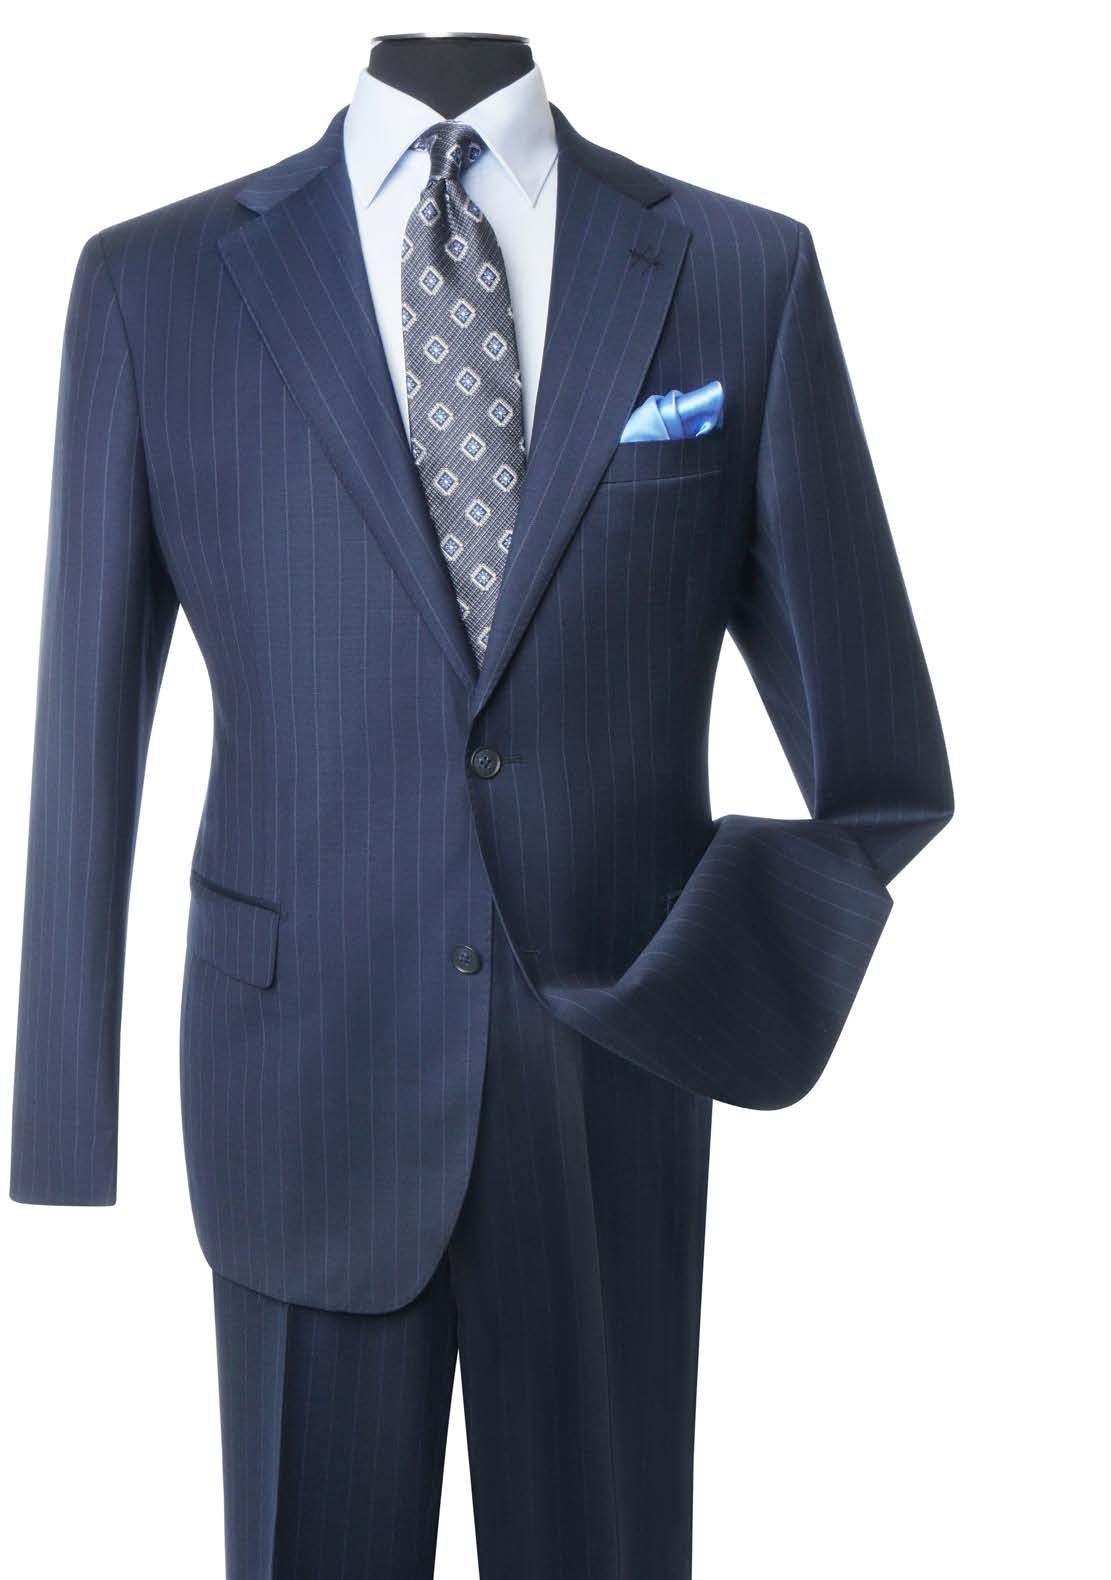 Select Suits at Men's Perfect fit